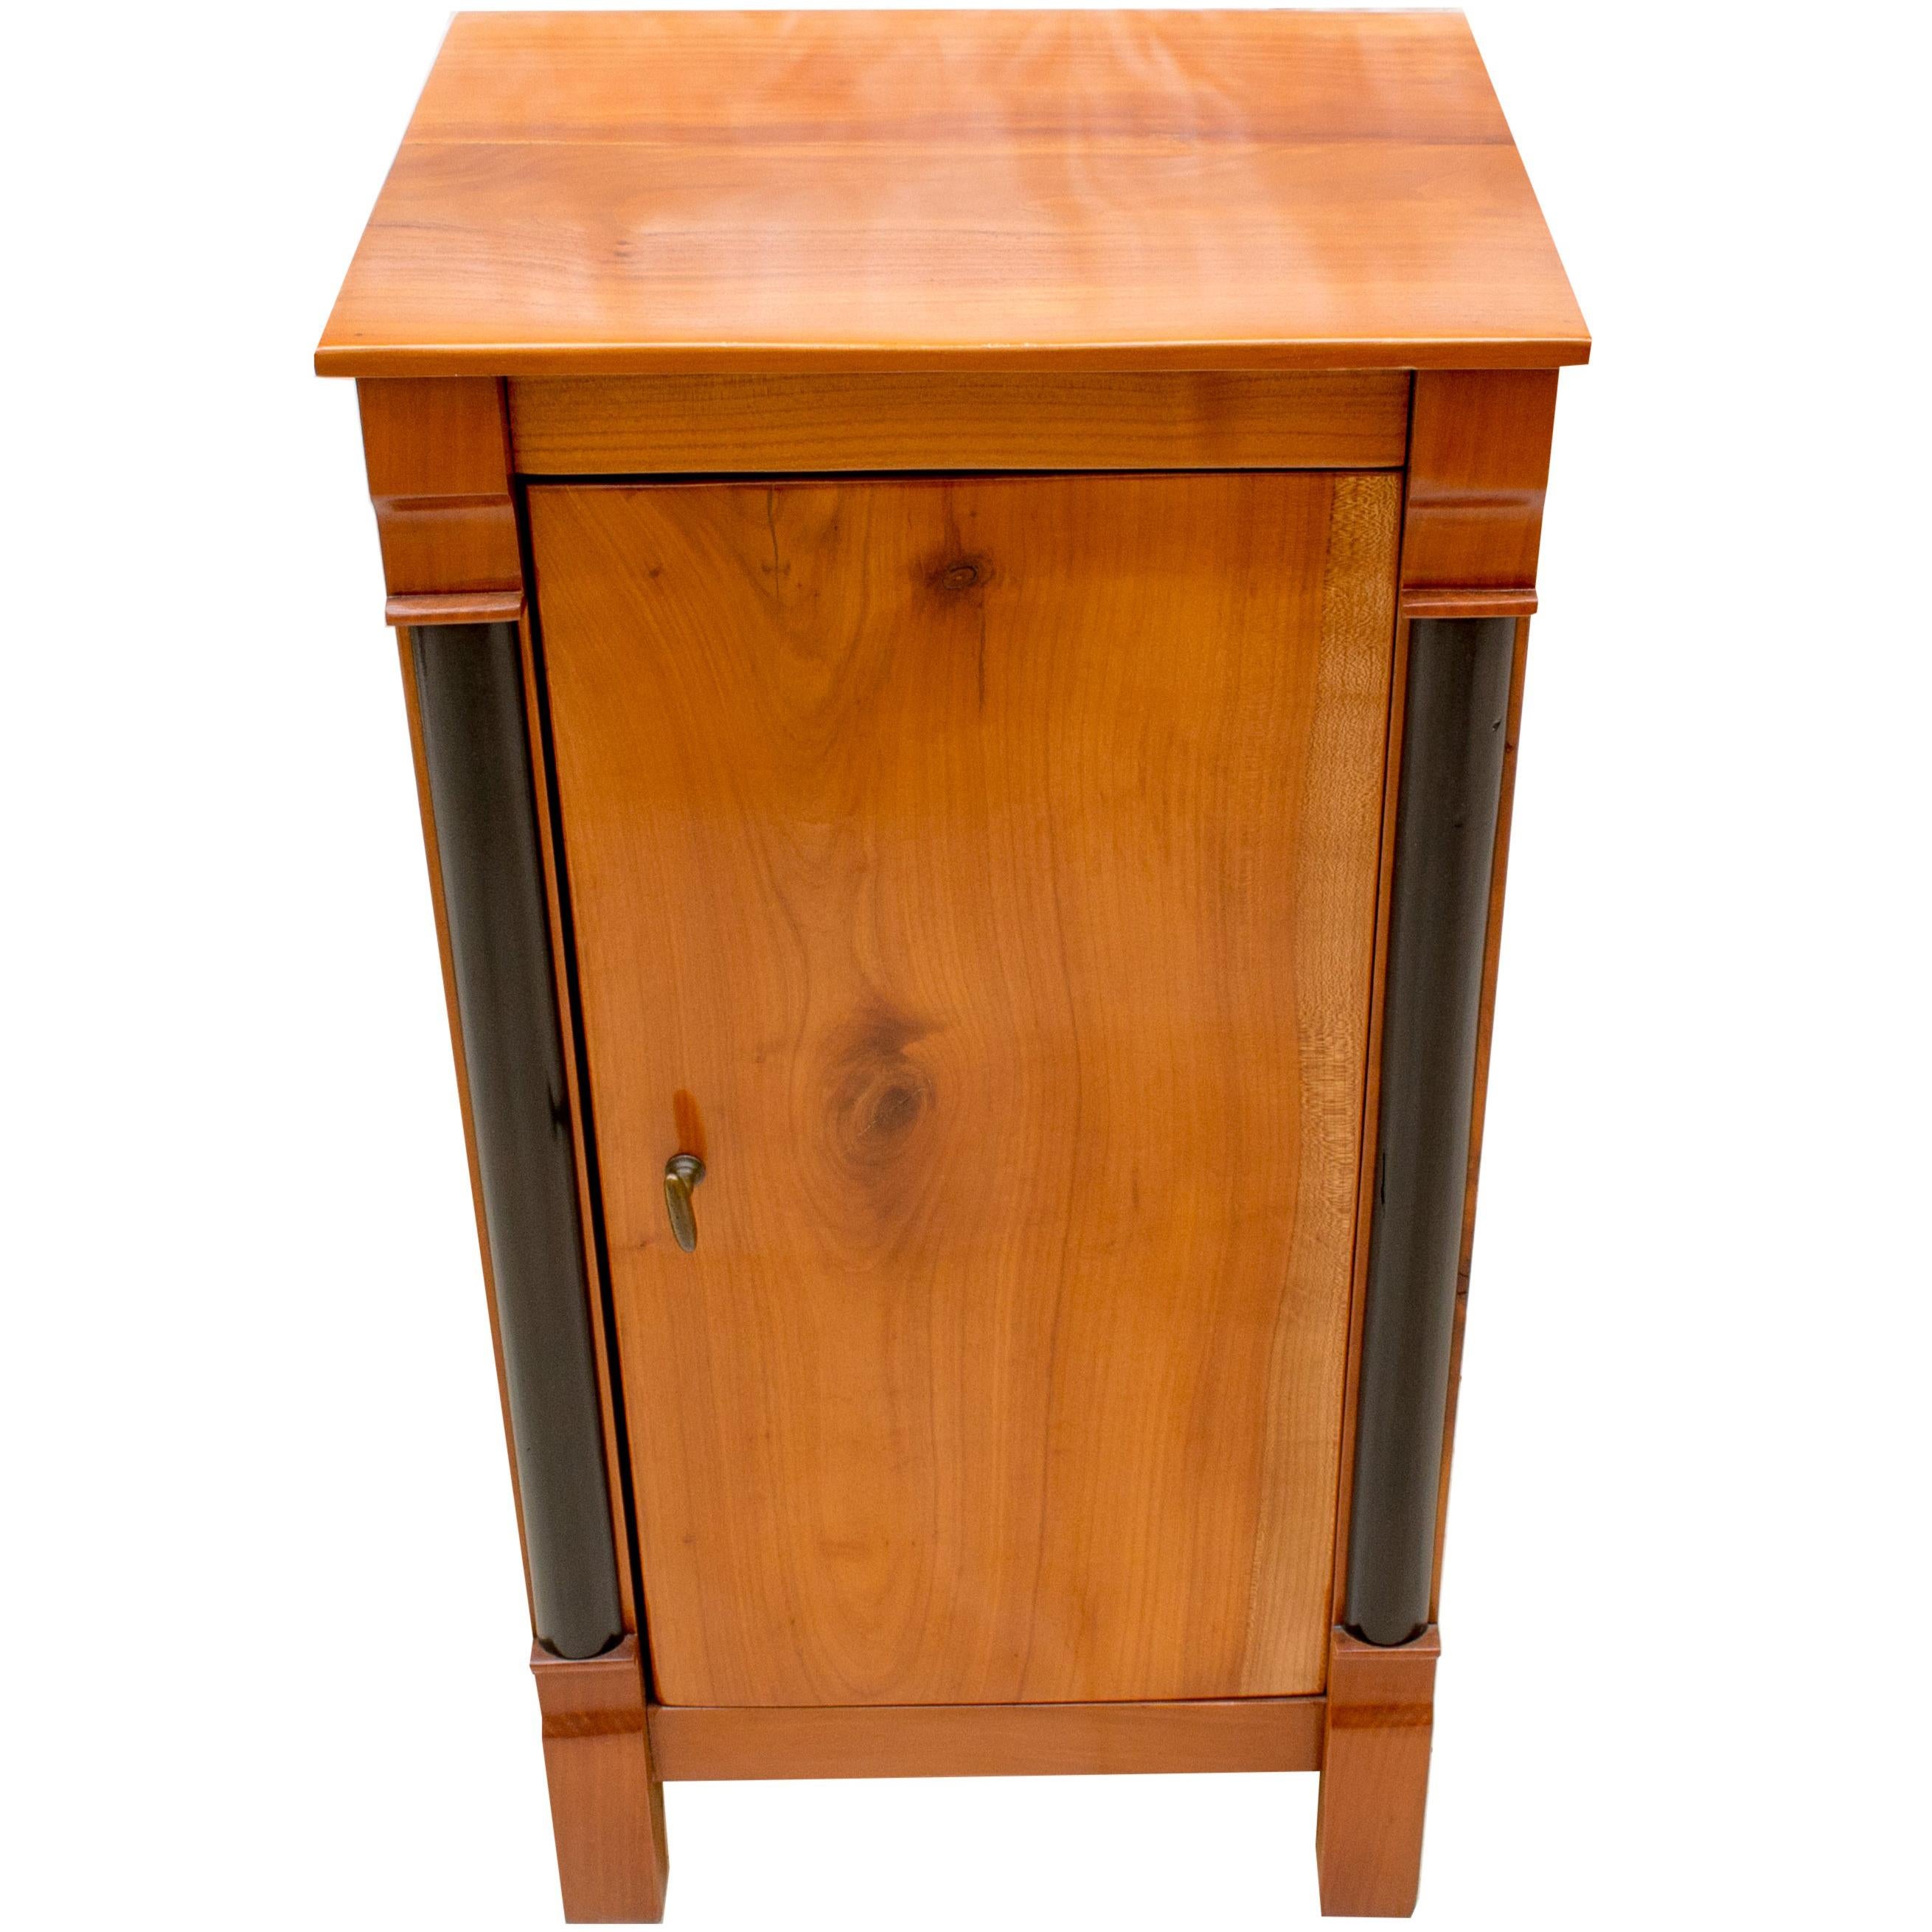 Early 19th Century Small Cherry Nightstand or Pillar Cabinet